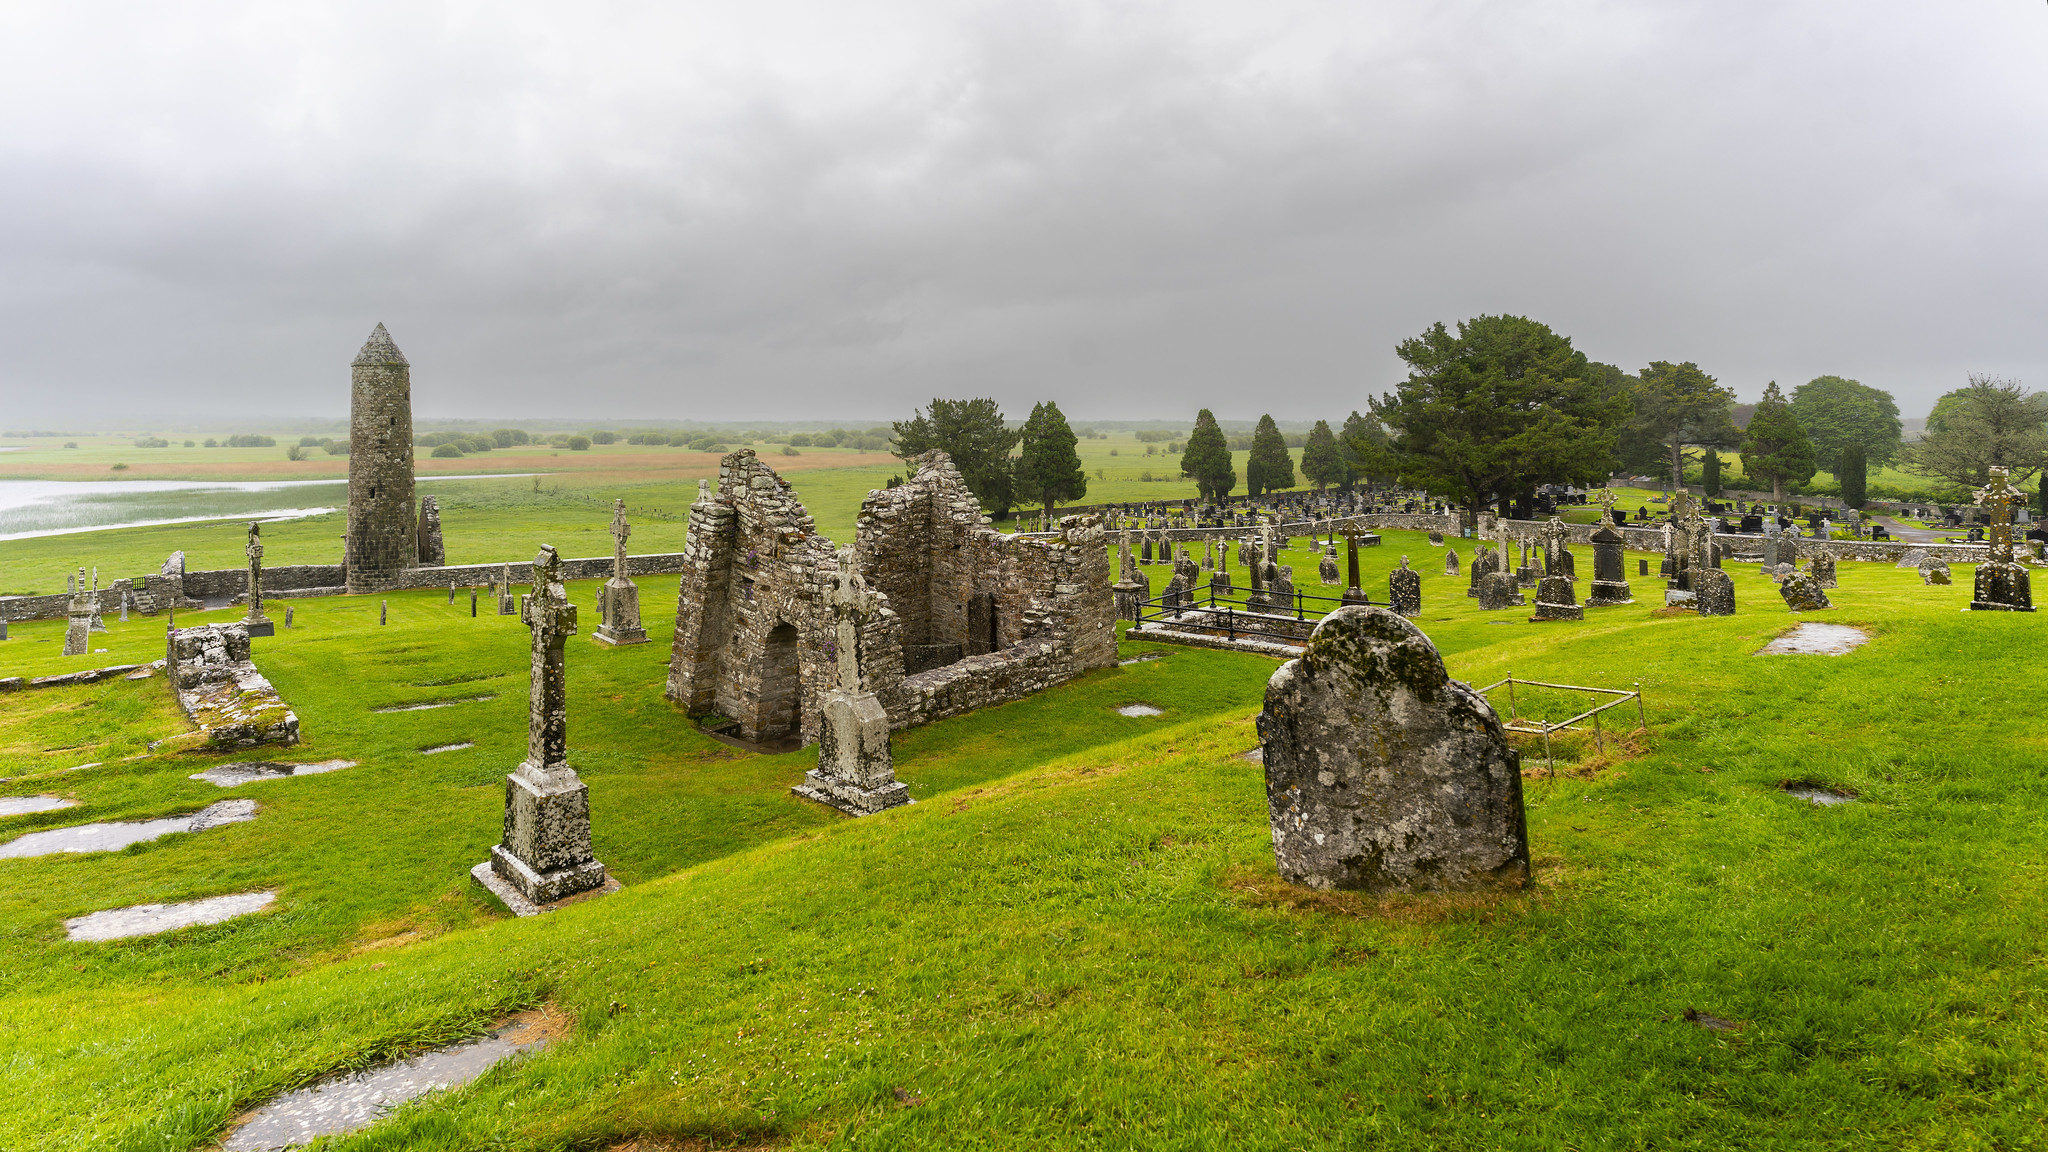 Clonmacnoise, 6th–13th century, County Offaly, Ireland